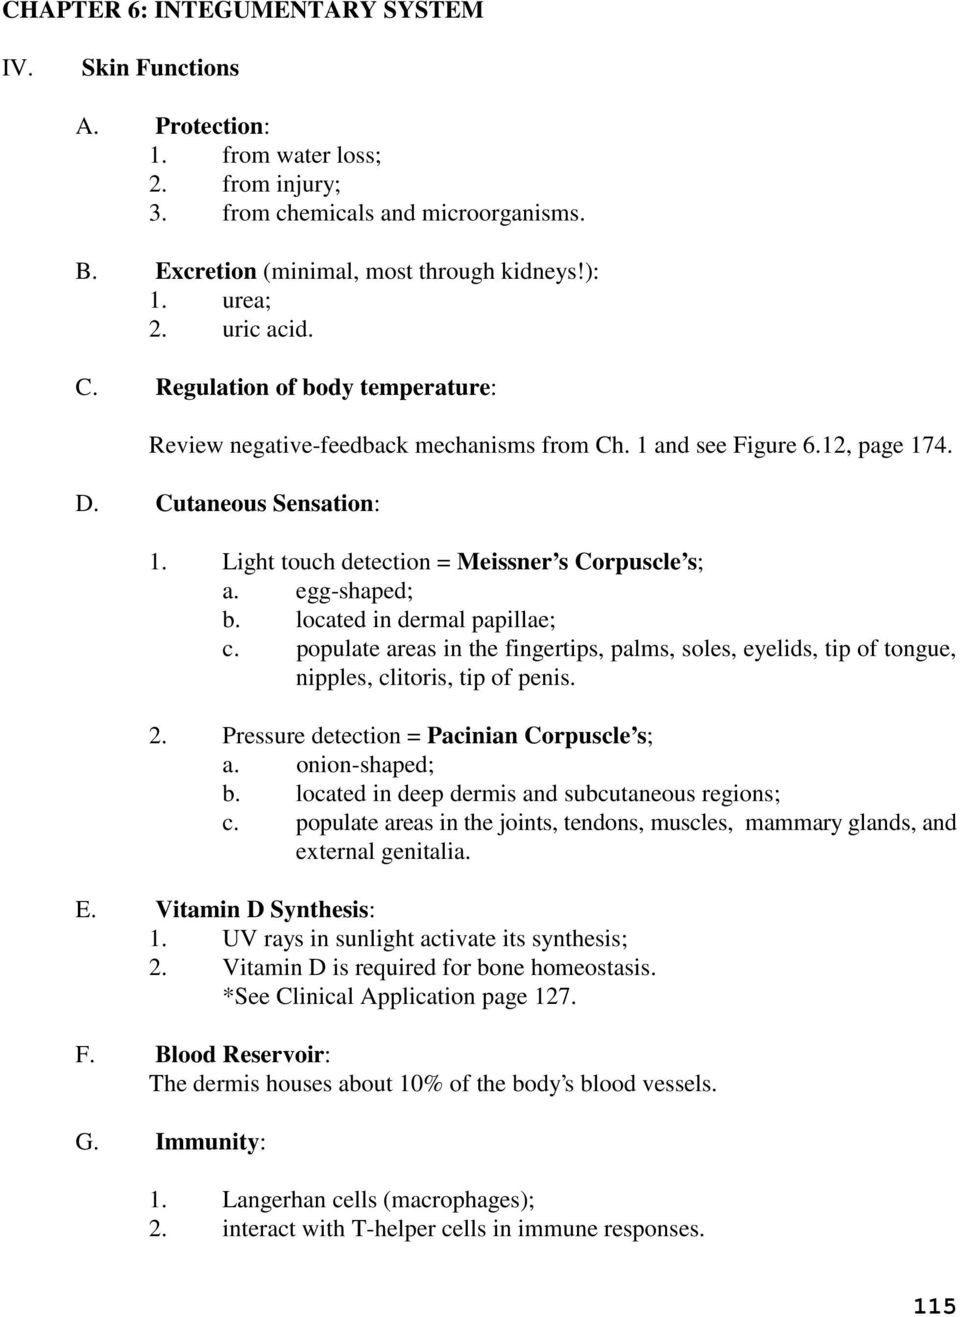 Integumentary System Worksheet Answers Chapter 6 Integumentary System 1 Explain why the Skin is